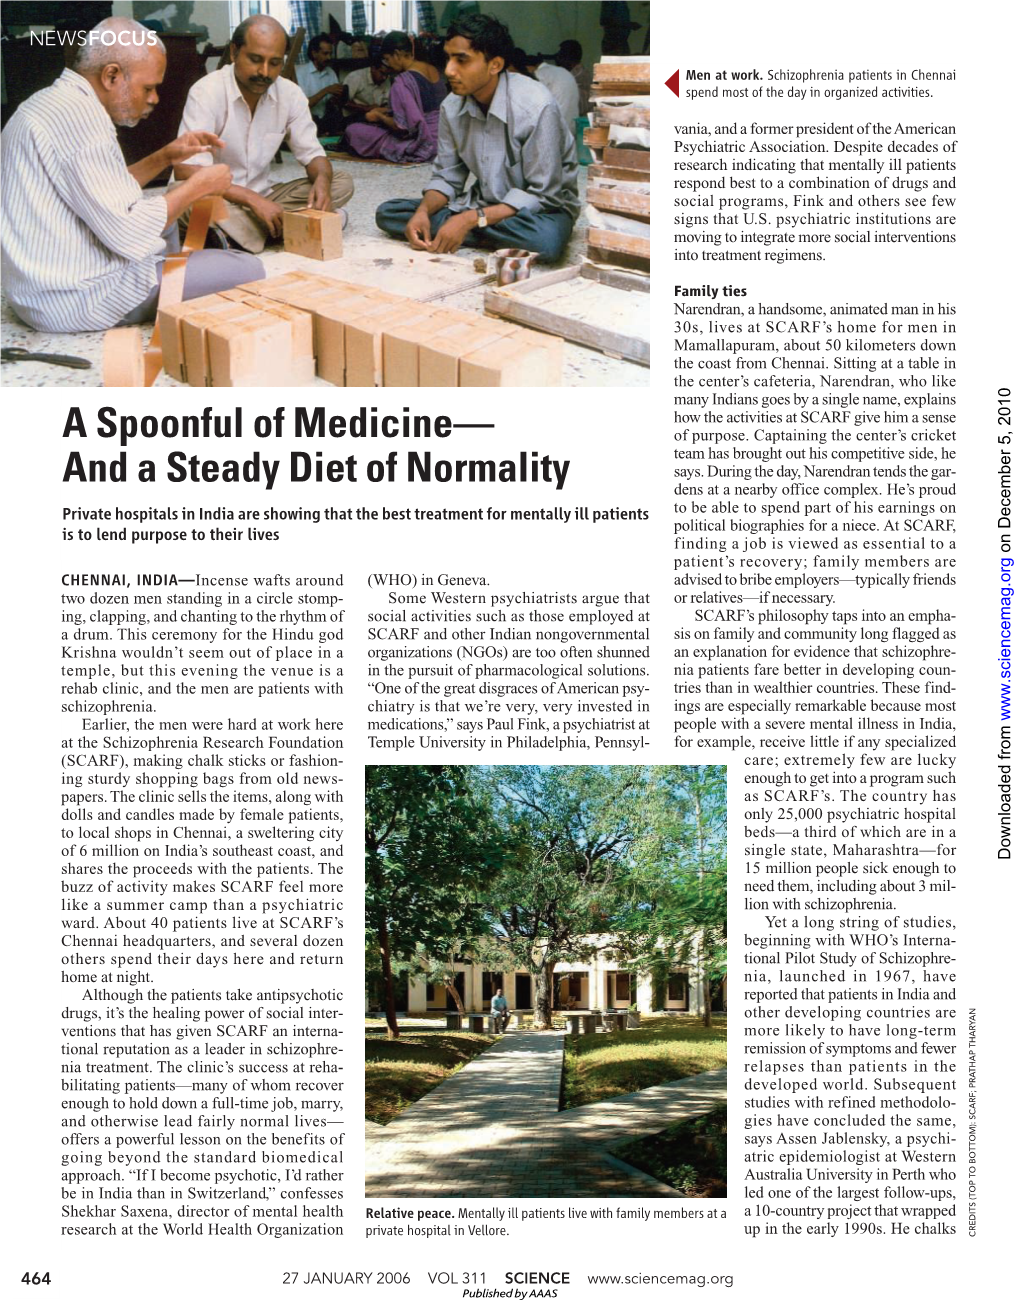 A Spoonful of Medicine— and a Steady Diet of Normality